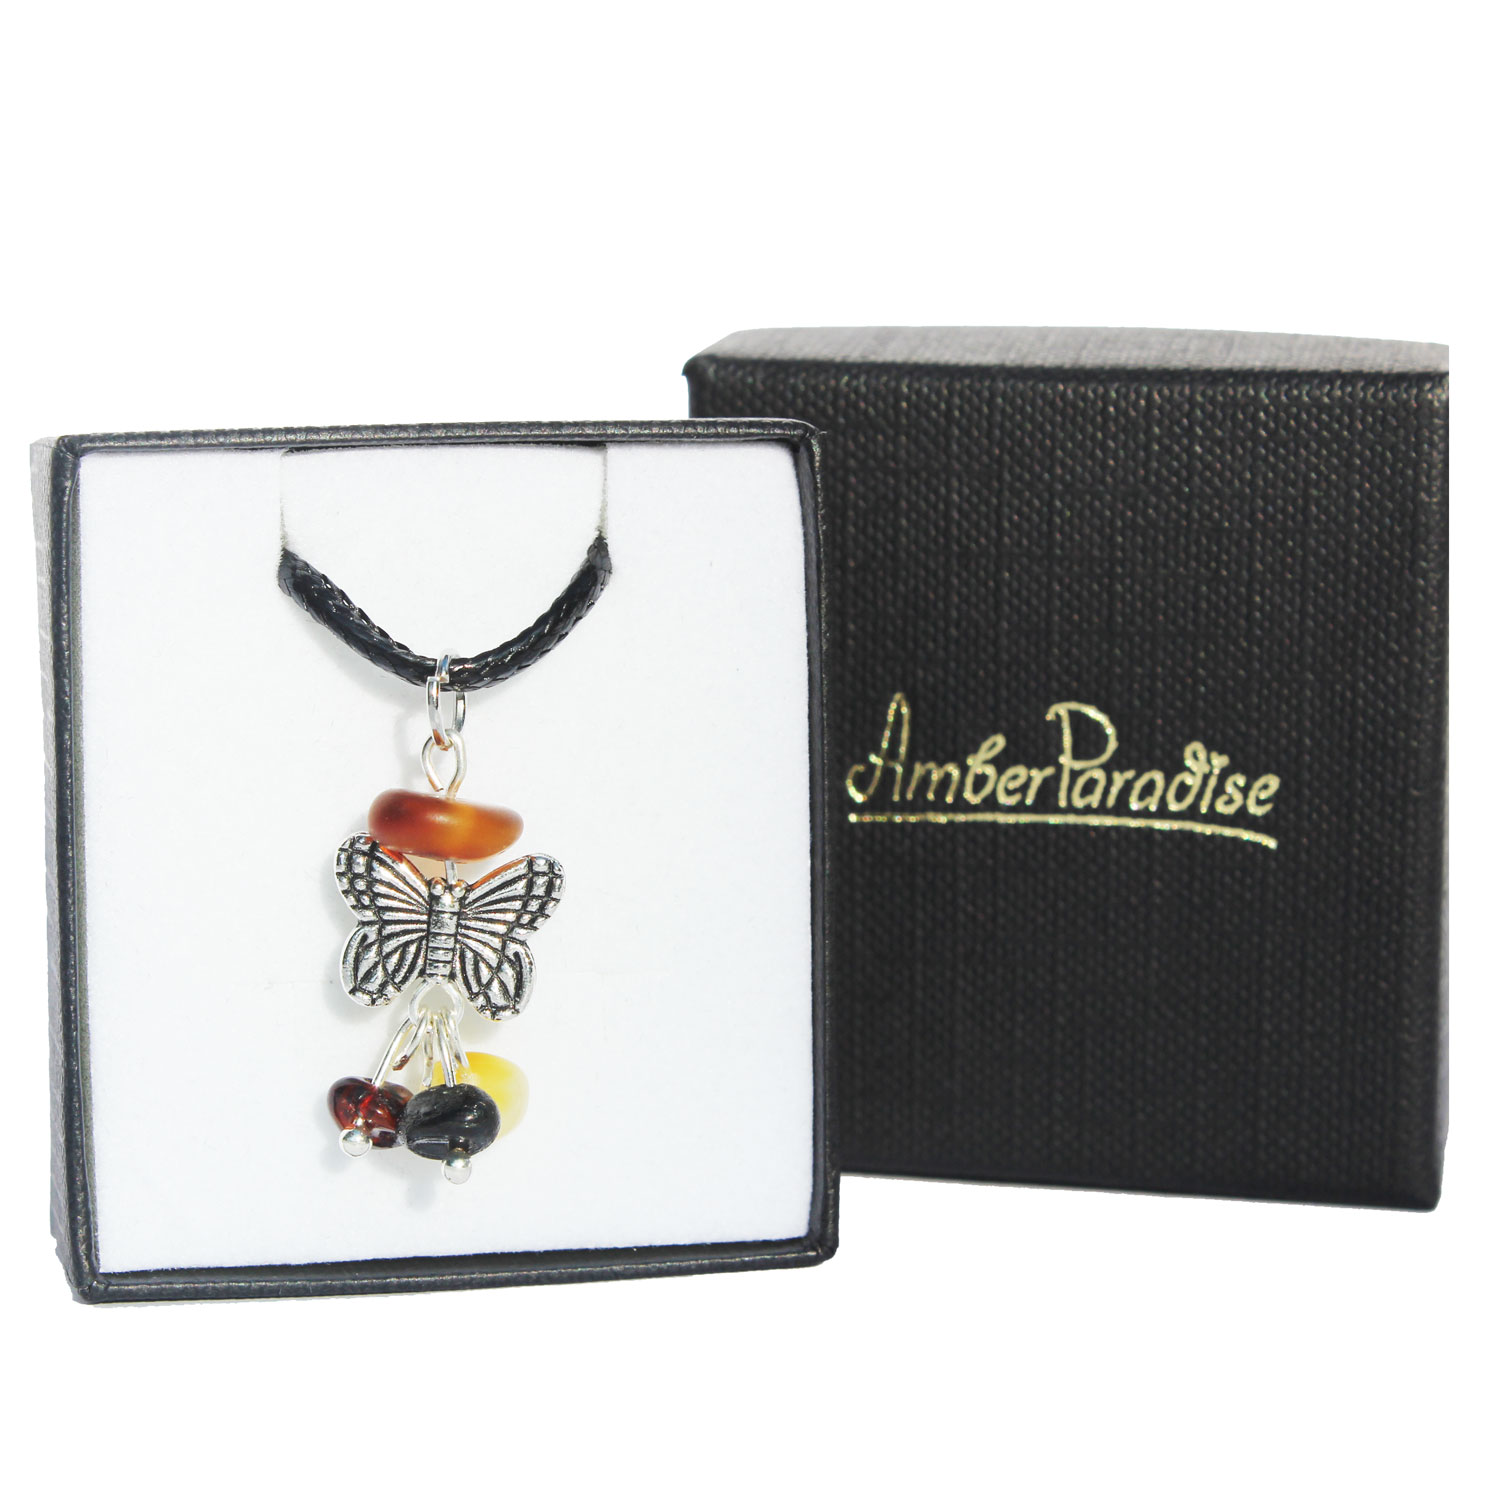 Amber Pendant - Butterfly